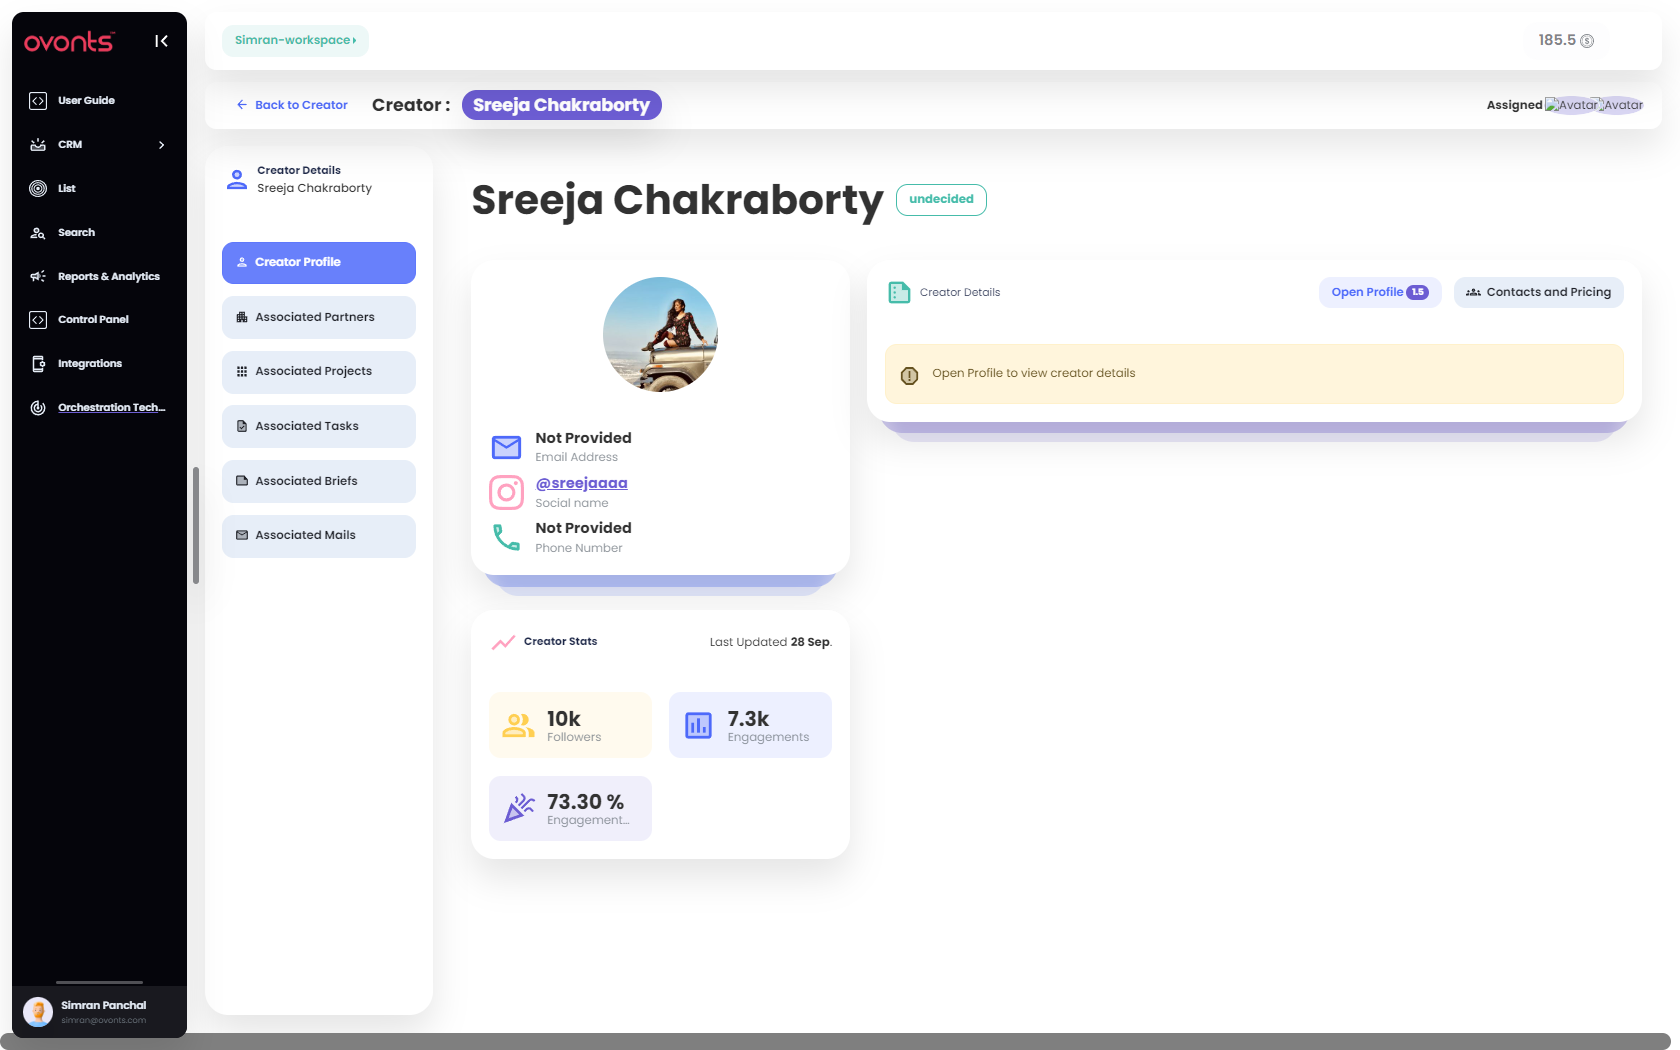 Automate your creator outreach, partner relationships and project in the most frugal way - collaborate, manage projects & content, communicate with internal & external stakeholders making creator management easy & efficient.